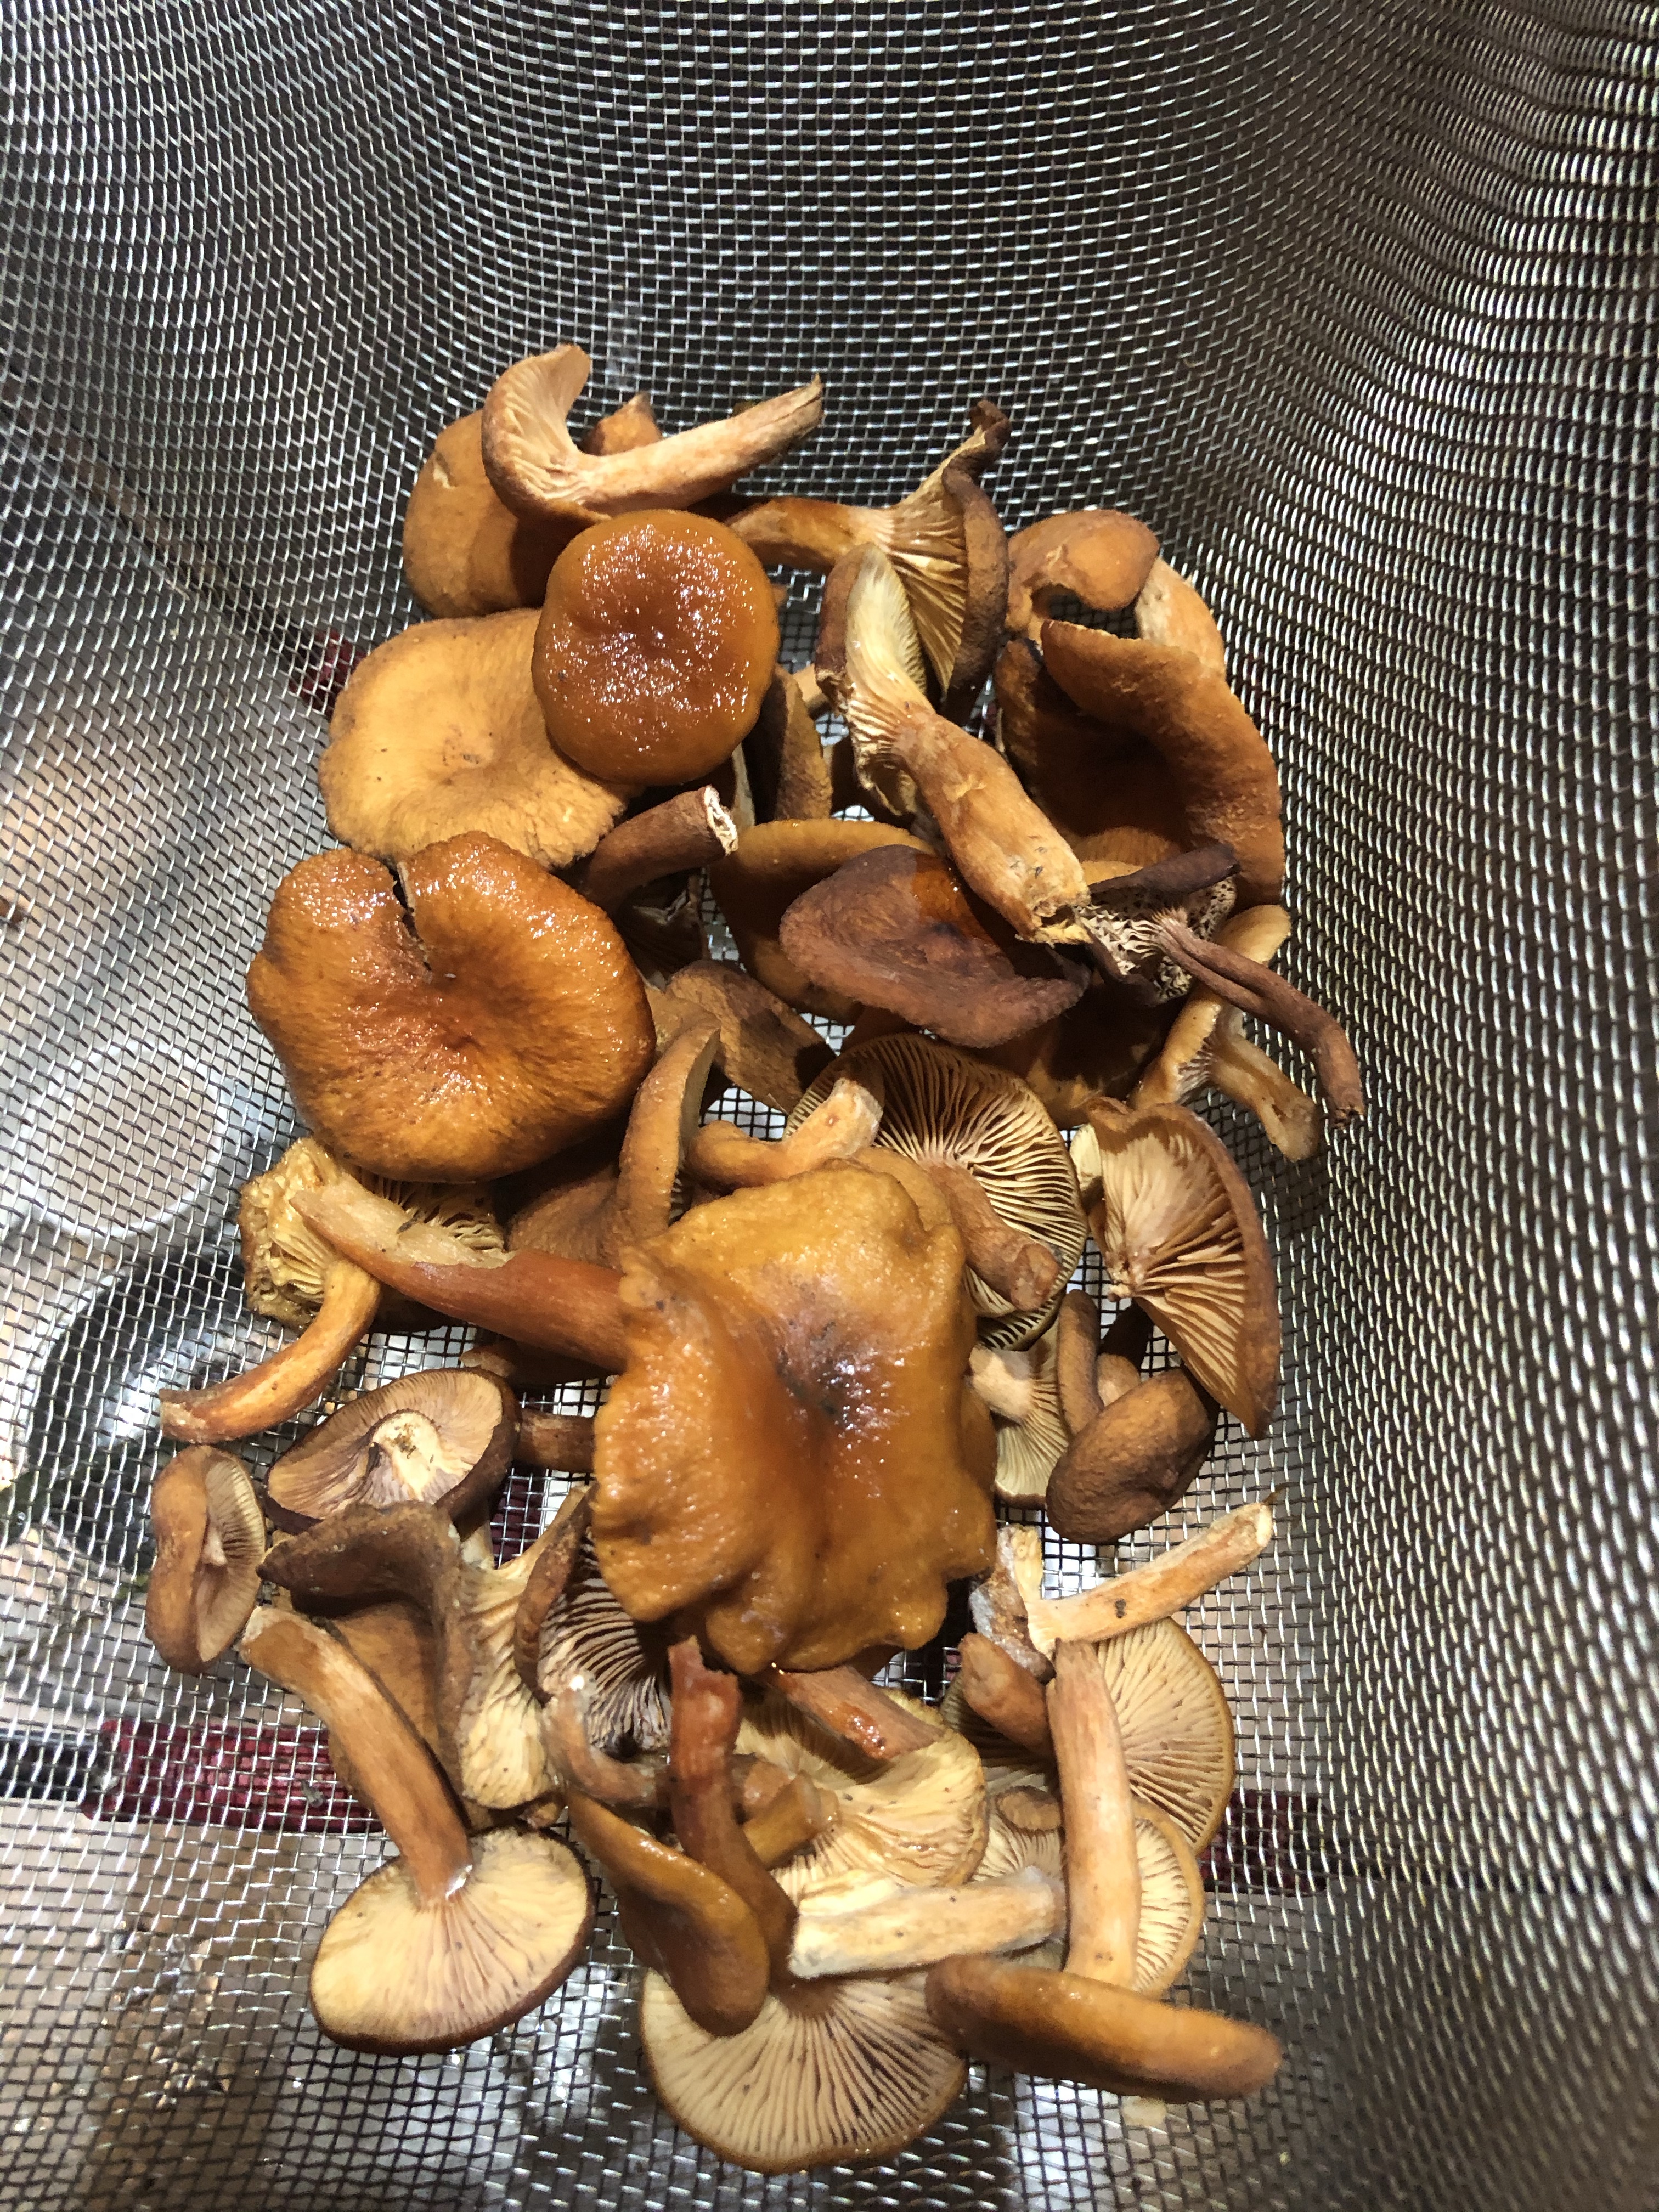 Wildcrafted candy cap mushrooms ready to use.